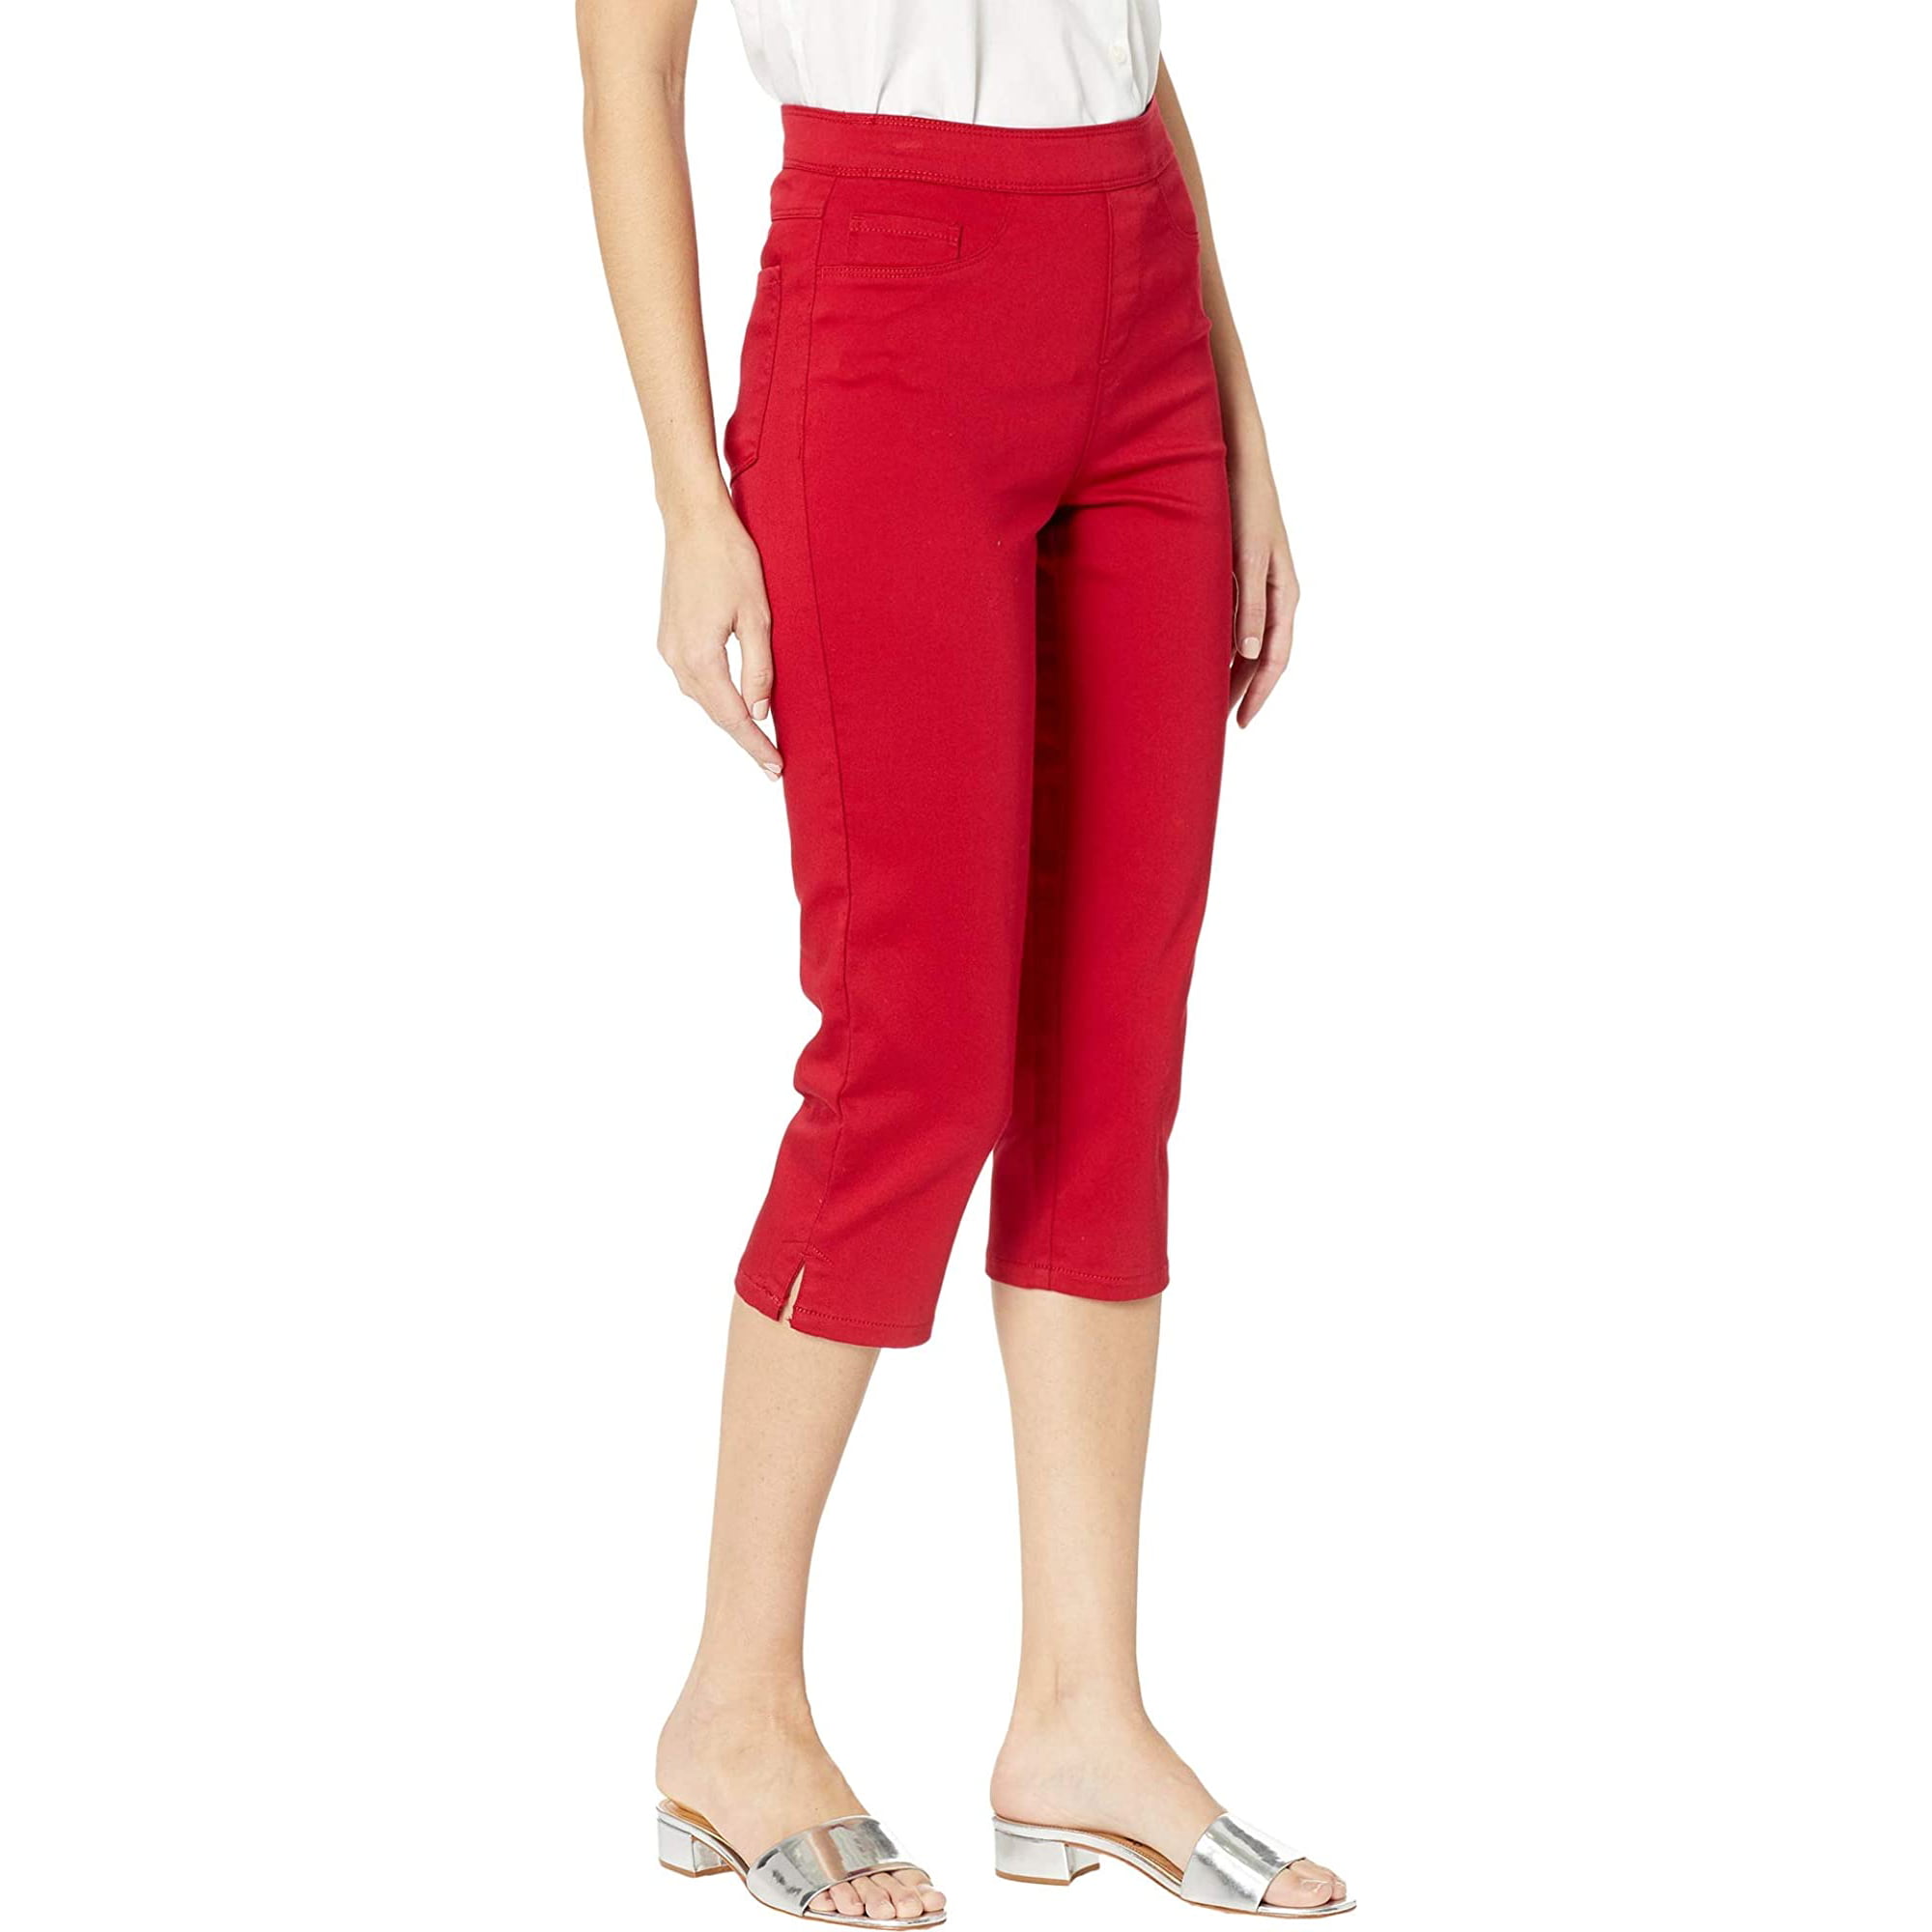 FDJ French Dressing Jeans D-Lux Denim Pull-On Capris in Red 